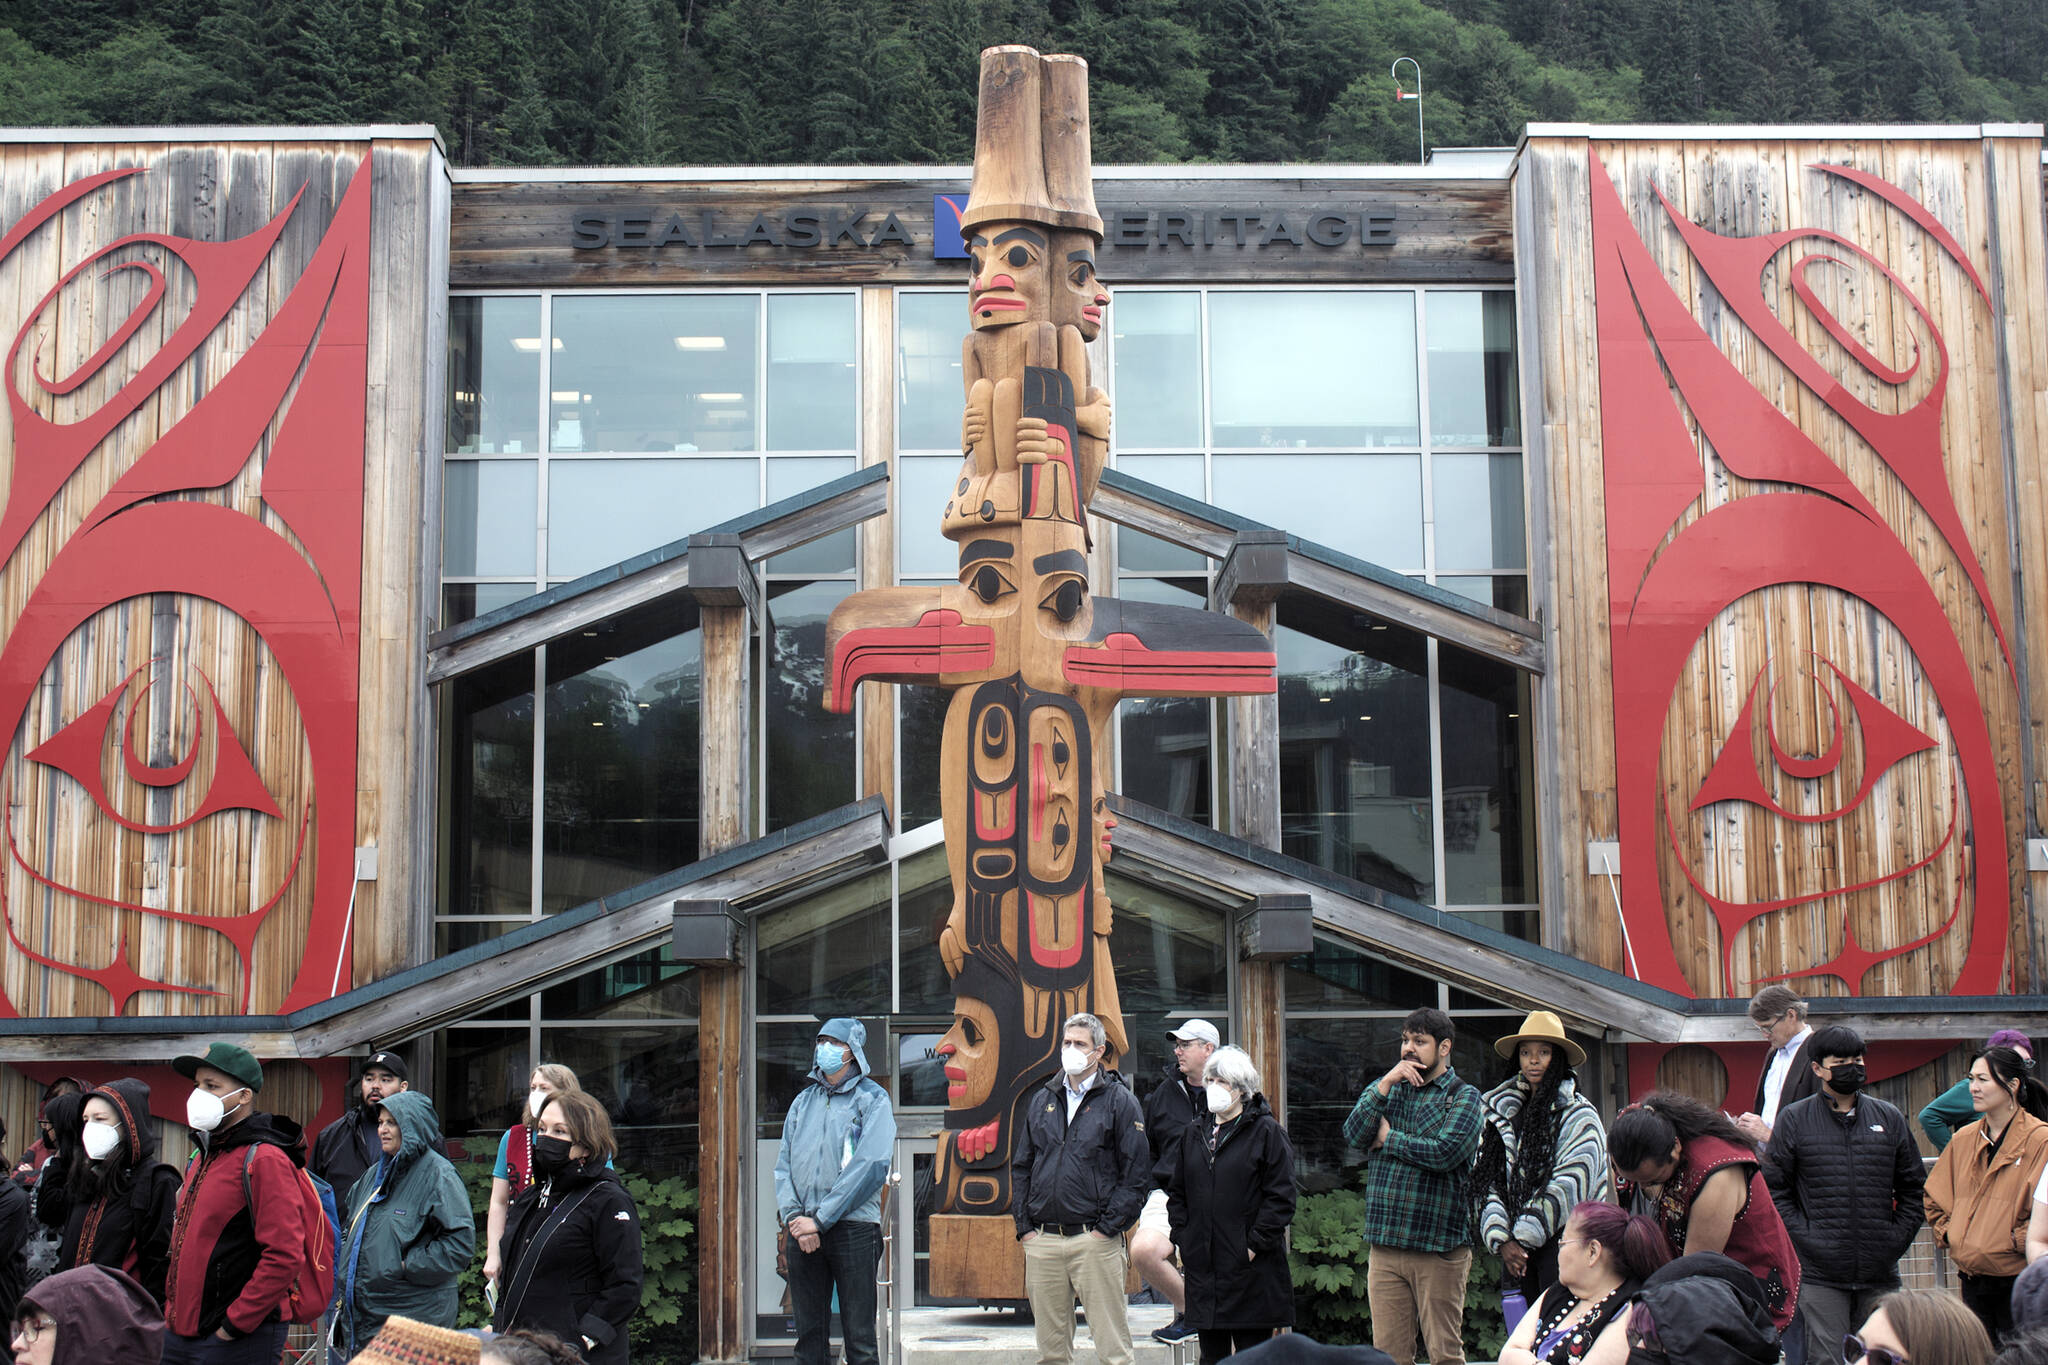 A 22-foot-high totem pole made from a 600-year-old red cedar tree receives its official welcoming during the debut of the Sealaska Heritage Arts Campus on Wednesday. The totem was crafted during a nine-month period by master carver TJ Young (Sgwaayaans) and his brother Joe (Gidaawaan). (Mark Sabbatini / Juneau Empire)